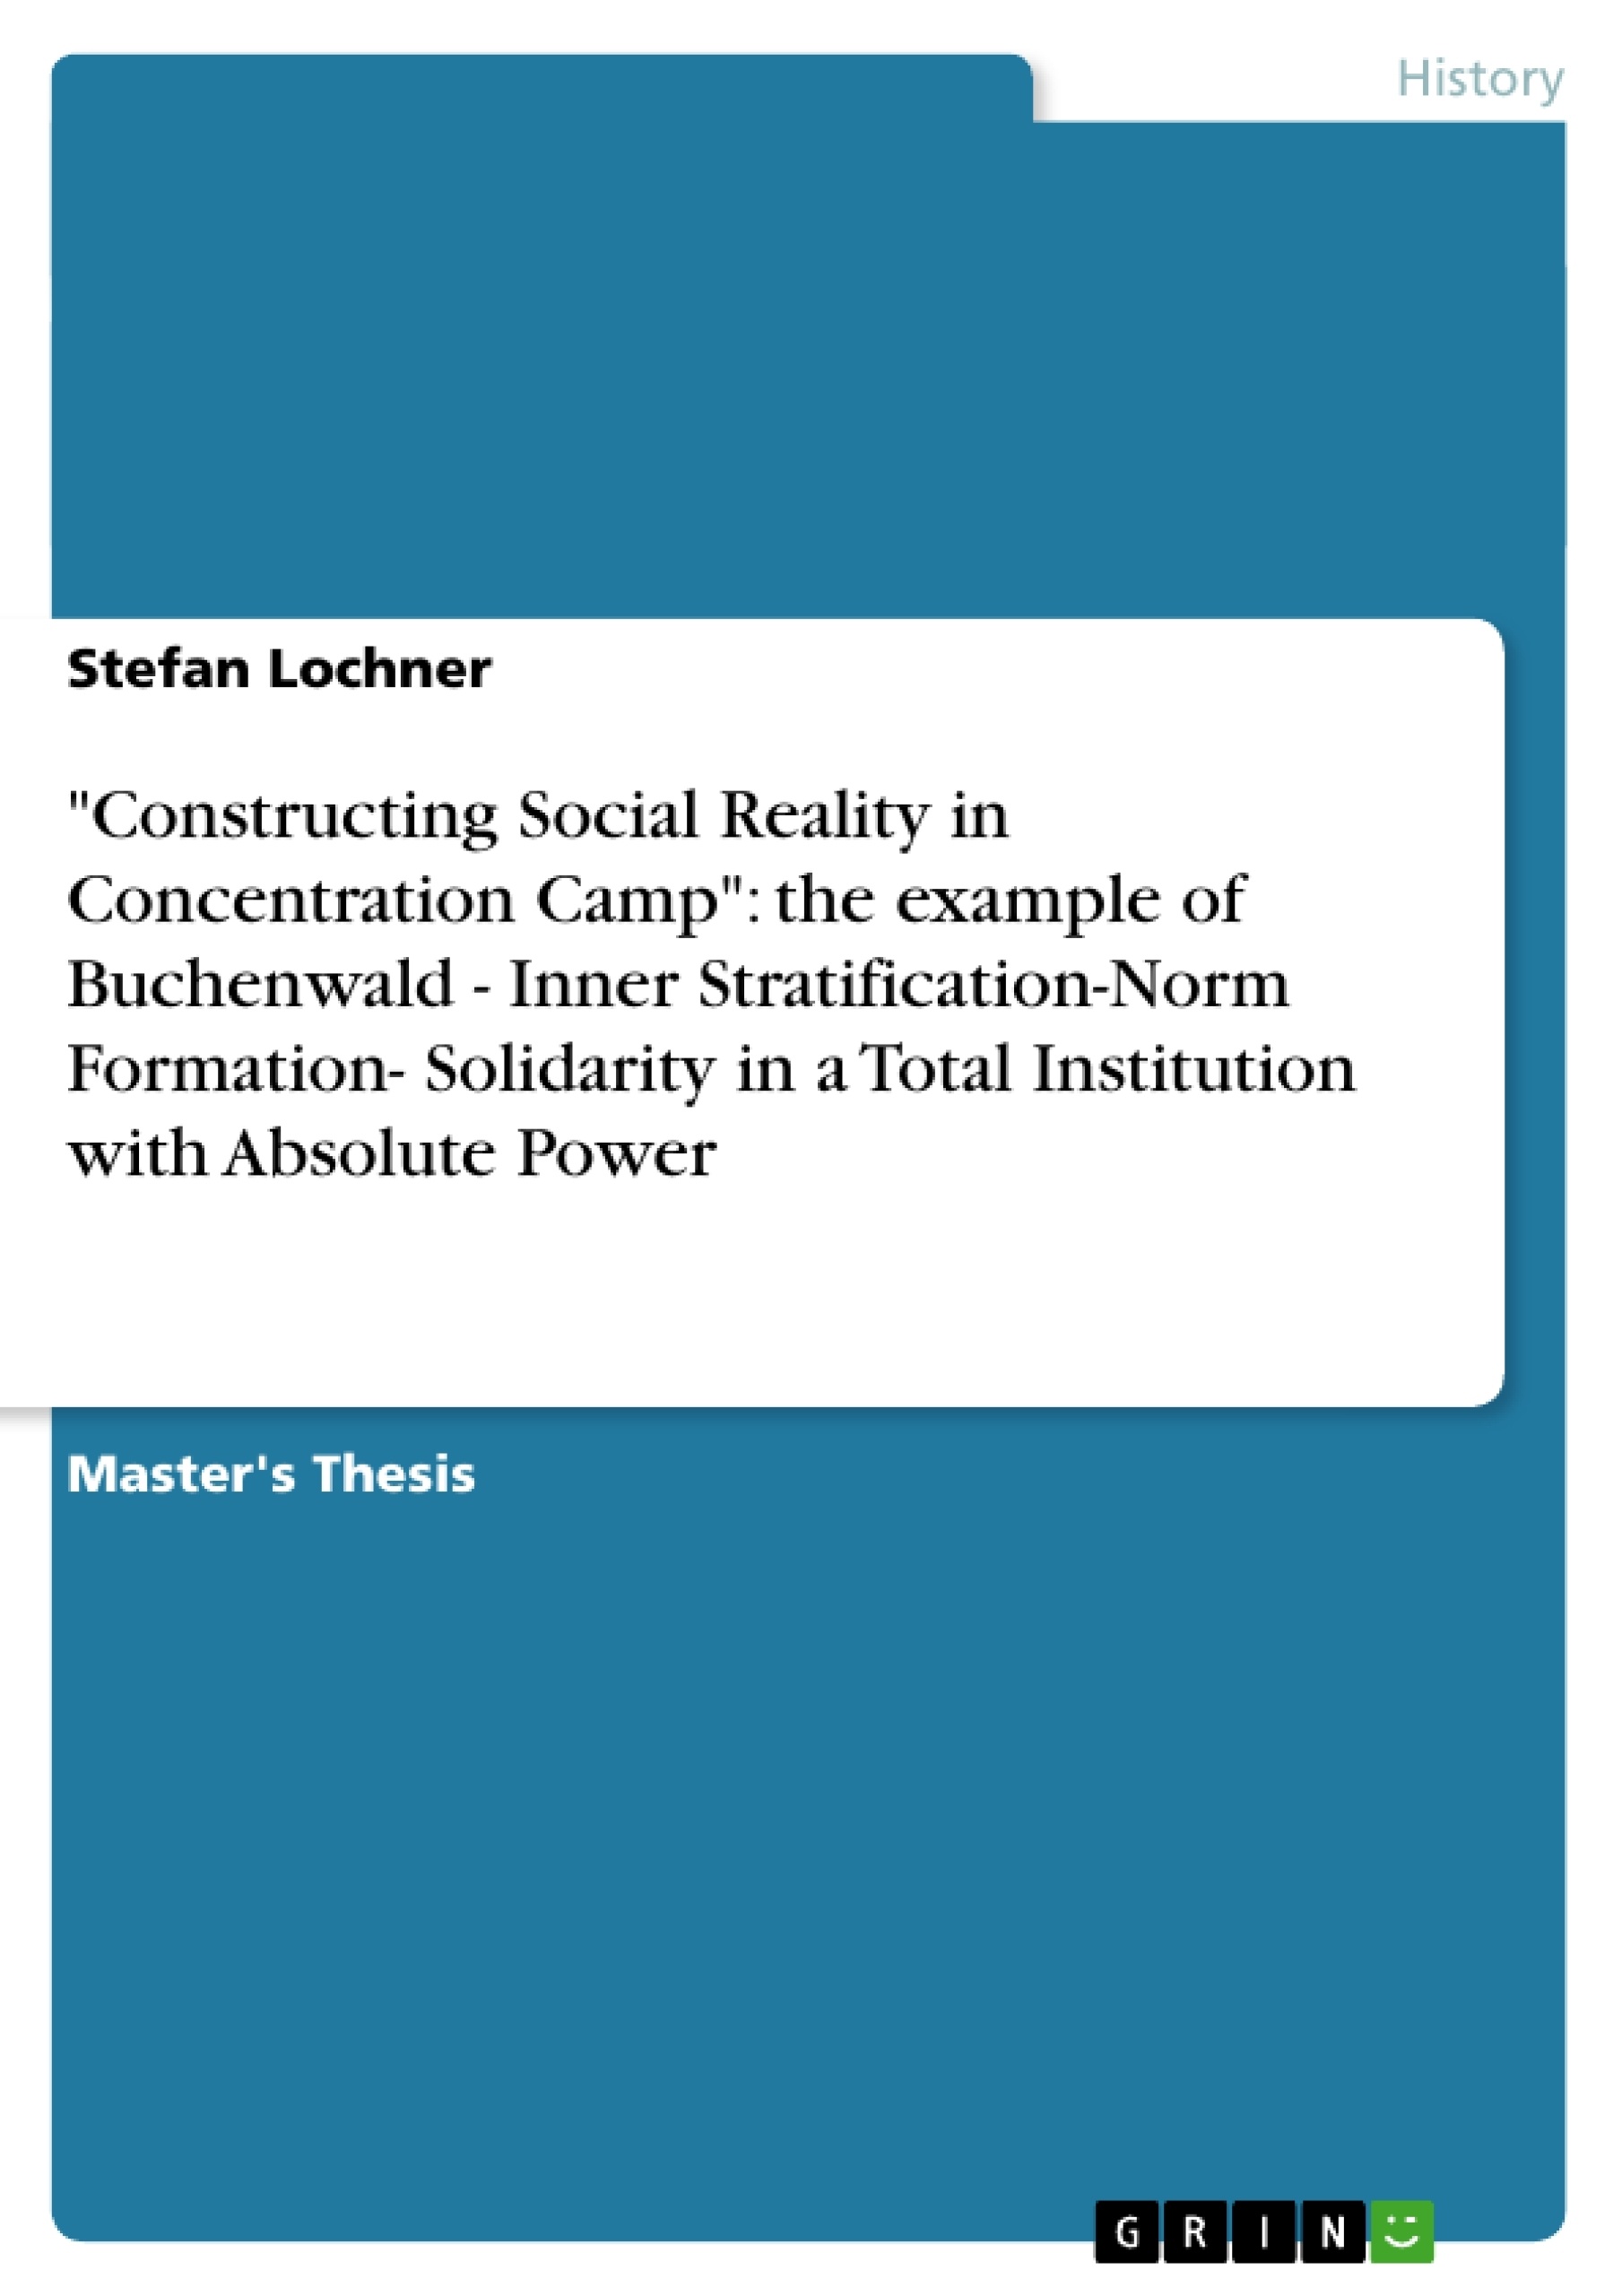 Thesis concentration camps